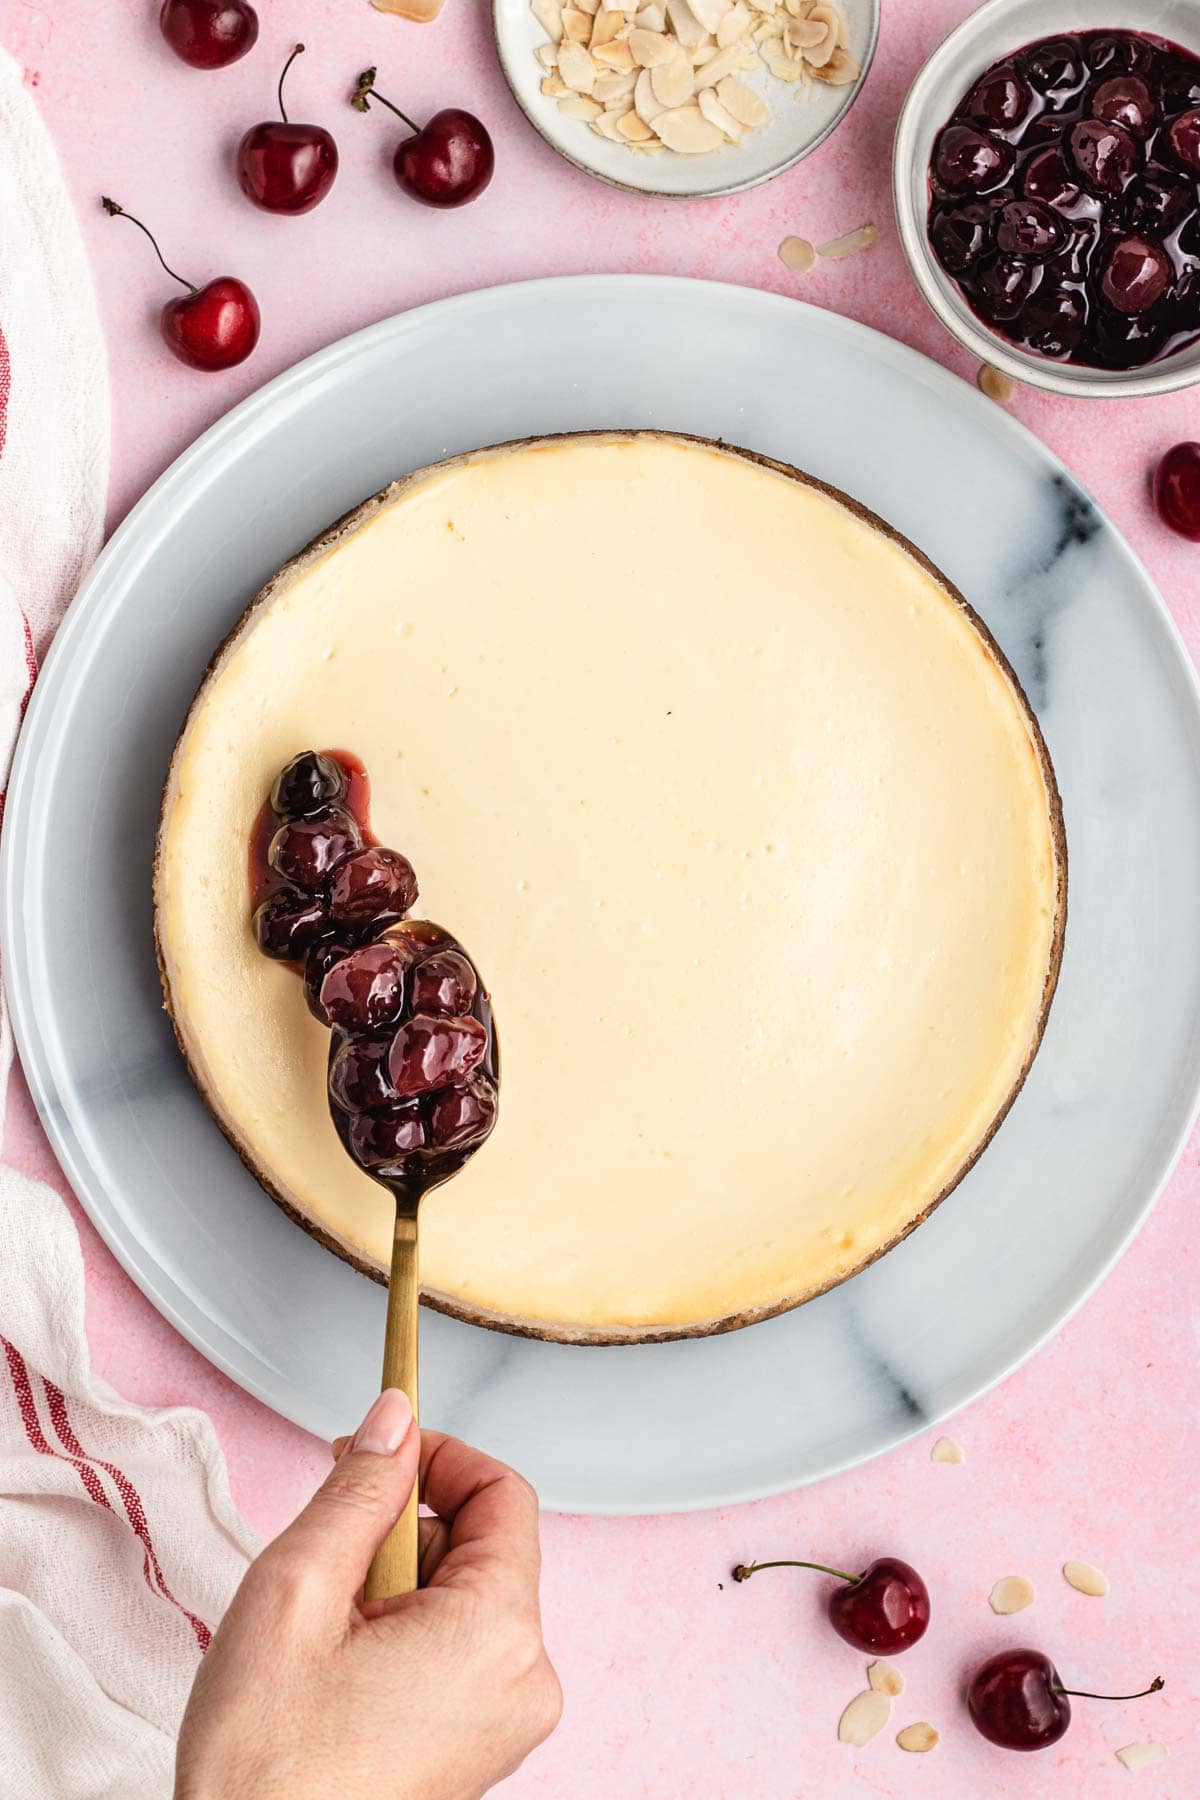 Cherry Cheesecake adding cherry topping to baked cheesecake on cake plate